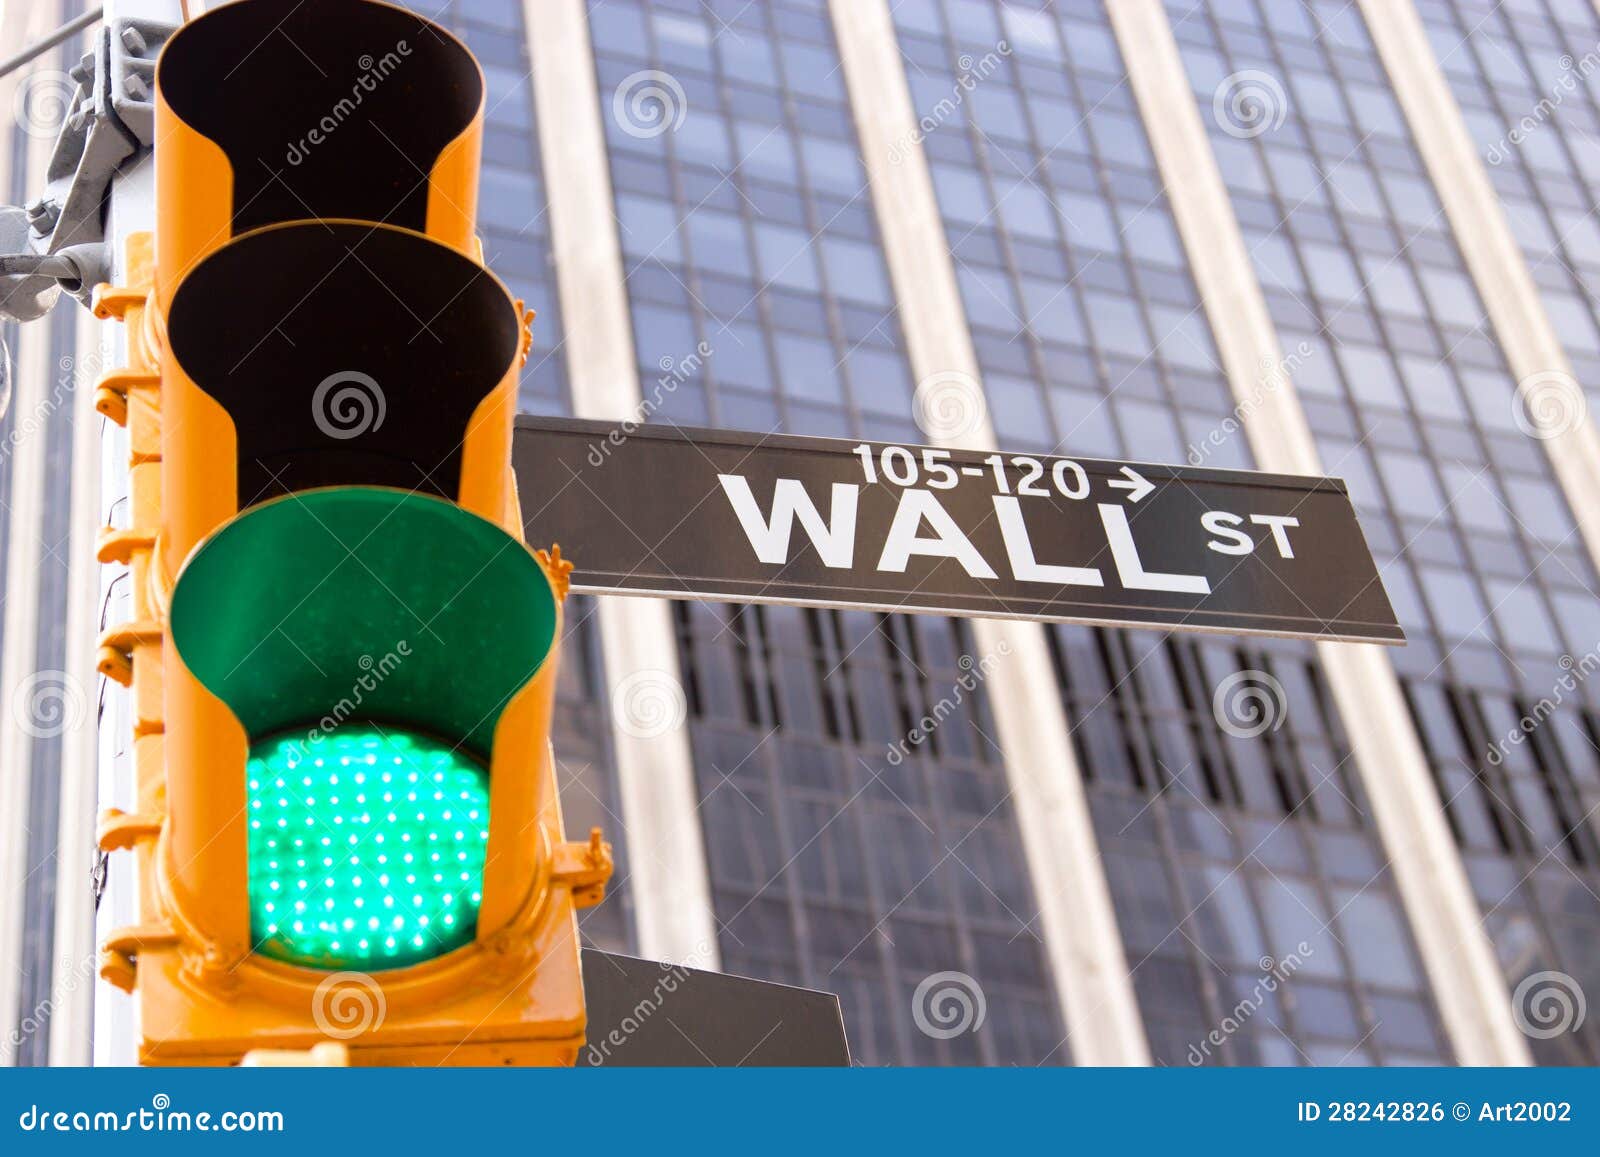 wall street sign and traffic light, new york